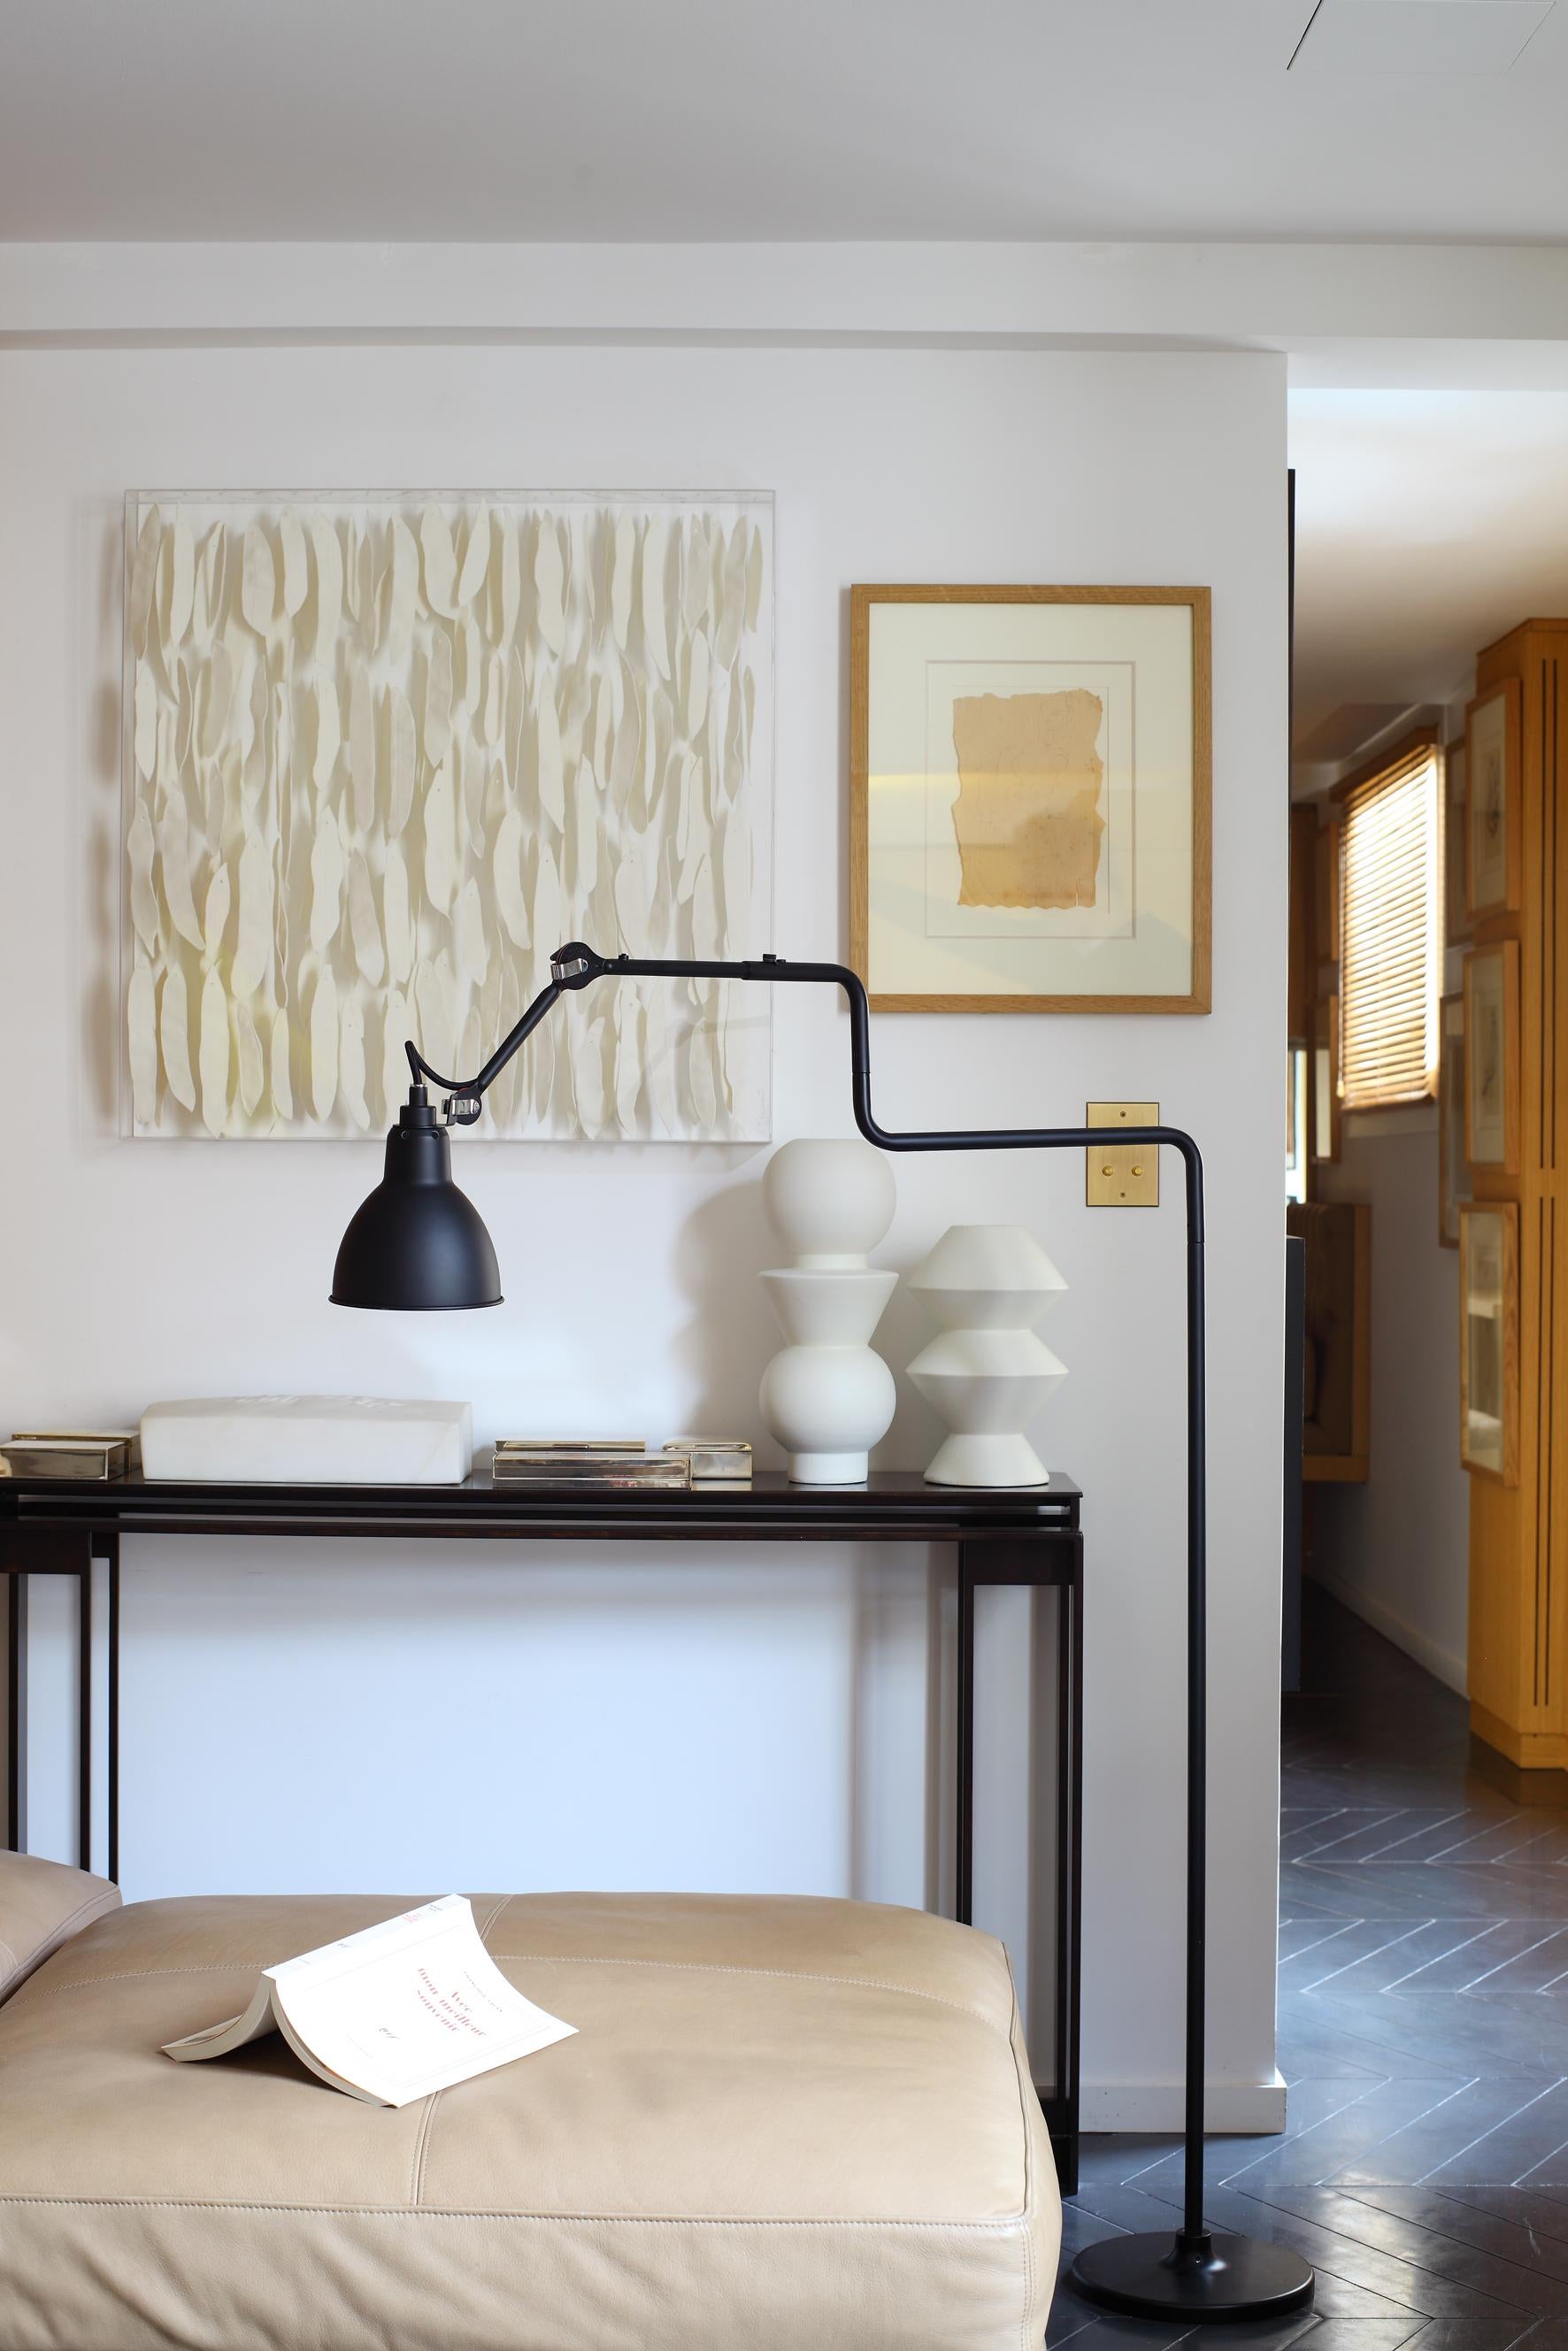 DCW Editions La Lampe Gras N°411 Floor Lamp in Black Arm and Chrome Shade In New Condition For Sale In Brooklyn, NY